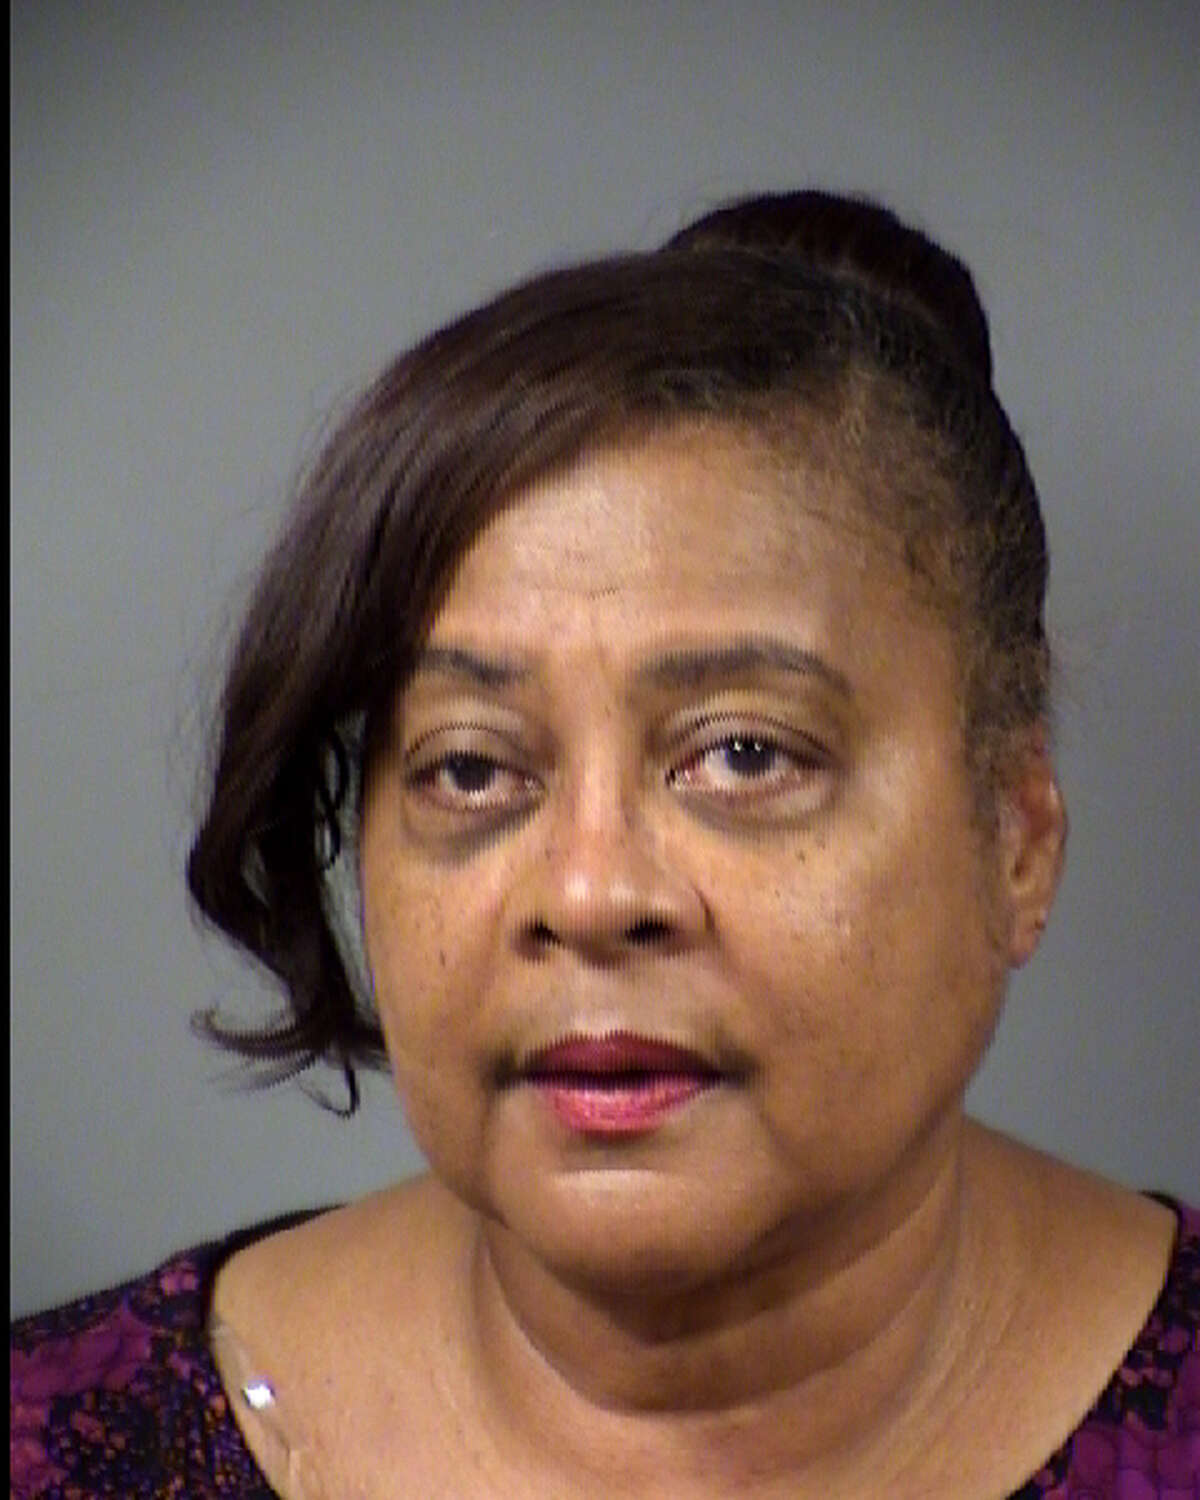 State Rep. Laura Thompson, I-San Antonio, turned herself in on Oct. 20, 2016. She had an outstanding warrant for an alleged assault with bodily injury of a family member charge.